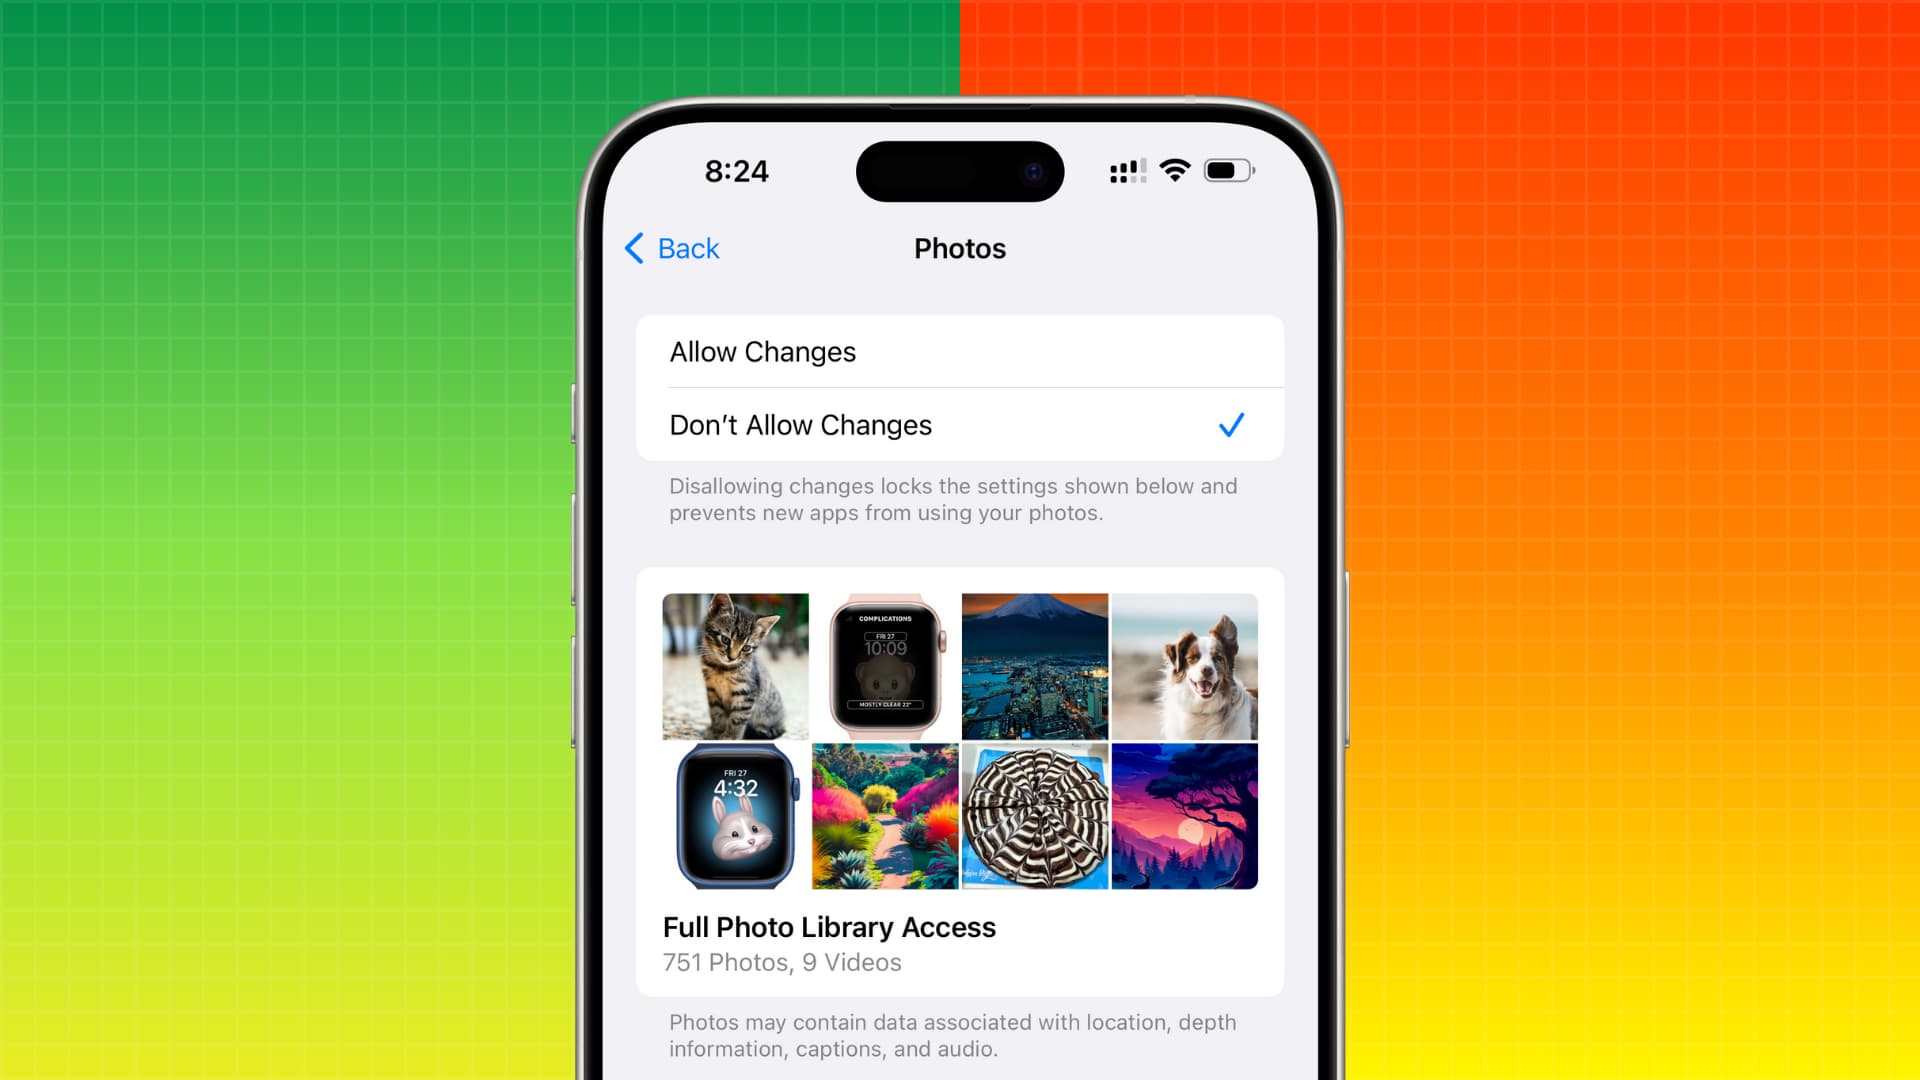 Restrict photo library access for iPhone apps